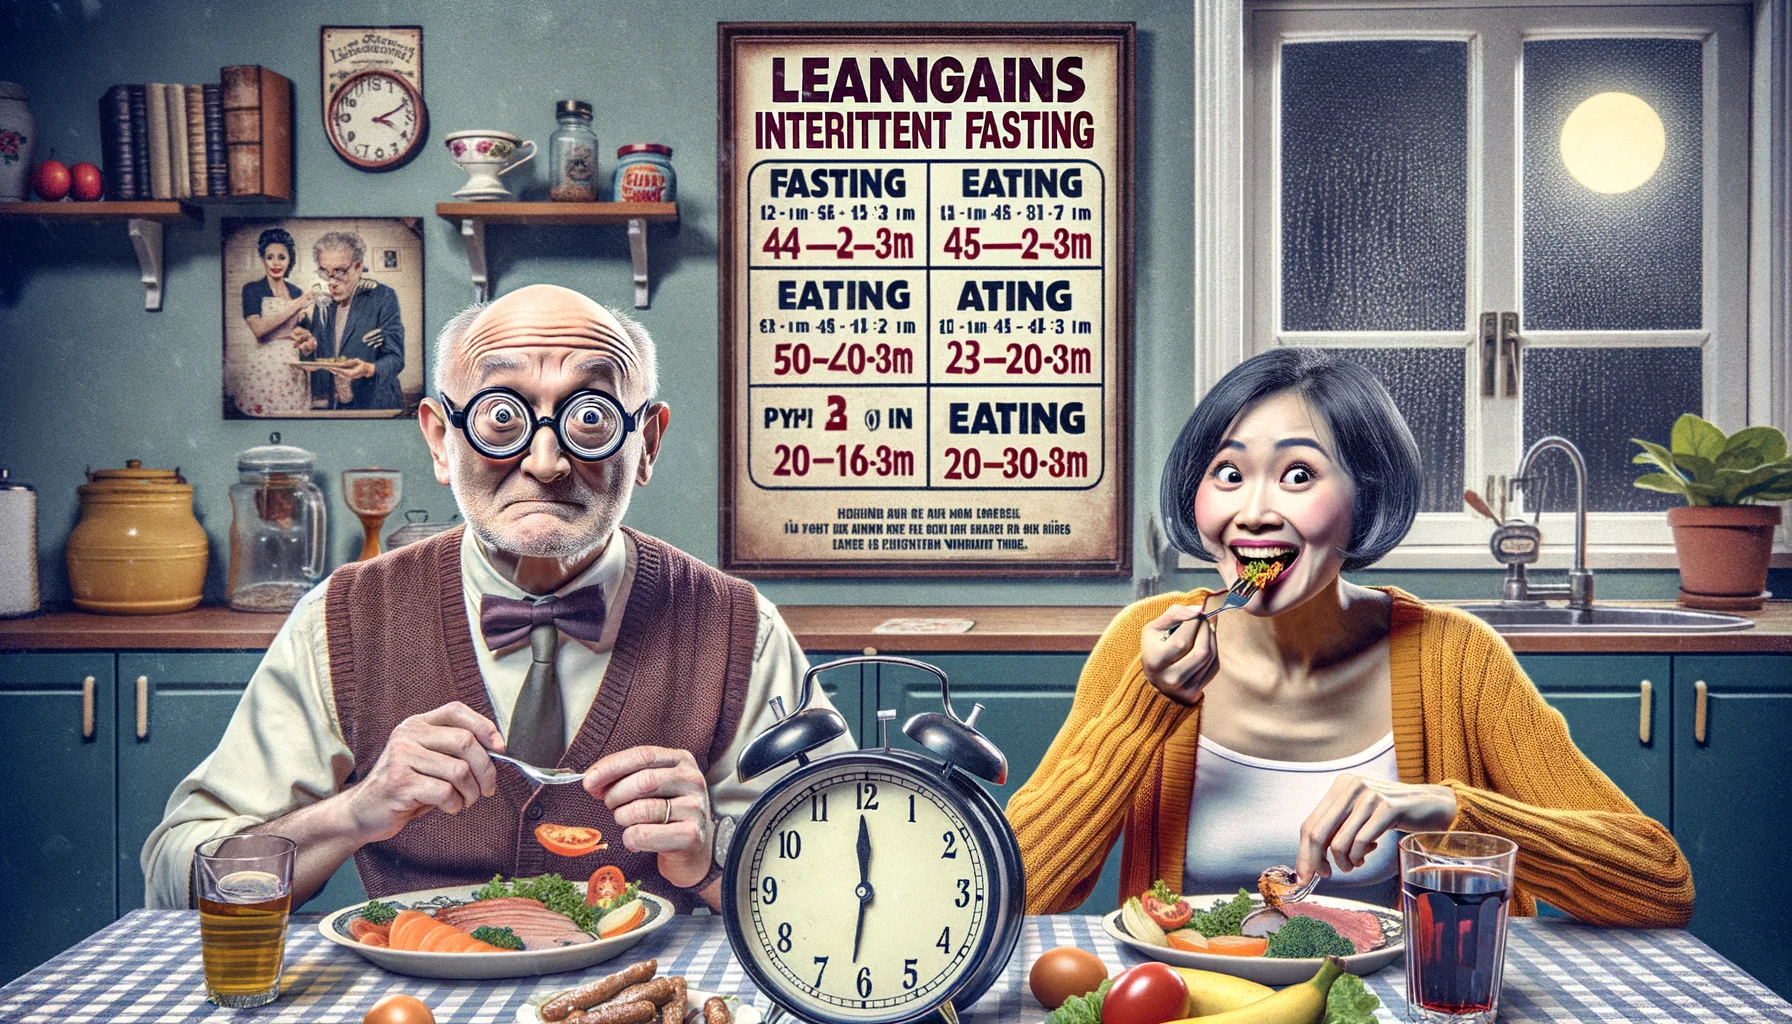 Create a lighthearted, comical image related to the concept of 'Leangains Intermittent Fasting'. Picture an older Caucasian man with glasses and an South Asian woman both sitting at a vintage style dining table cluttered with a clock showing different fasting and eating window times. The gentleman looks surprised as his plate is empty while the lady is smiling while indulging in her favourite meal not caring about the fasting time. The backdrop is a kitchen with a humorous poster explaining the fasting process, adding a touch of fun and irony to the atmosphere.